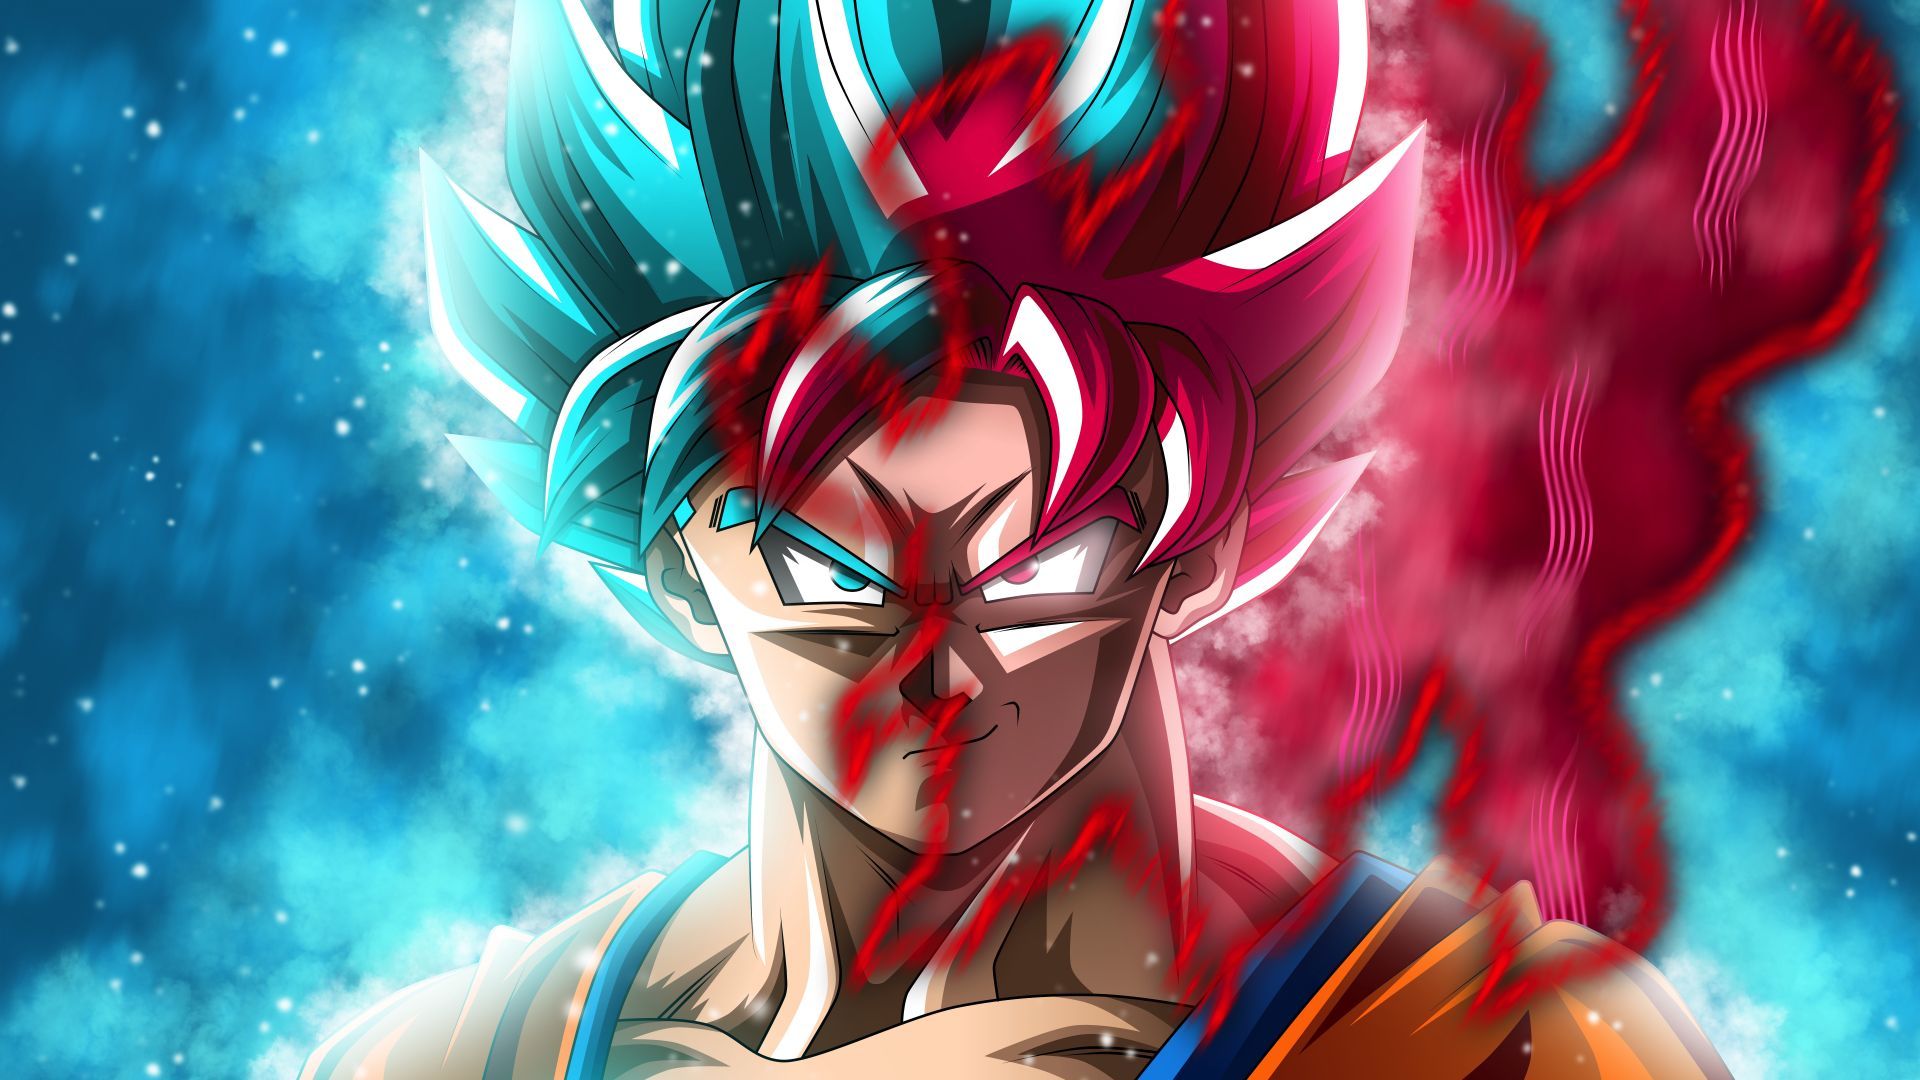 Desktop Wallpapers Goku, Angry Face, Anime Boy, Dragon Ball, Hd Image, Picture, Background, 8d32ab